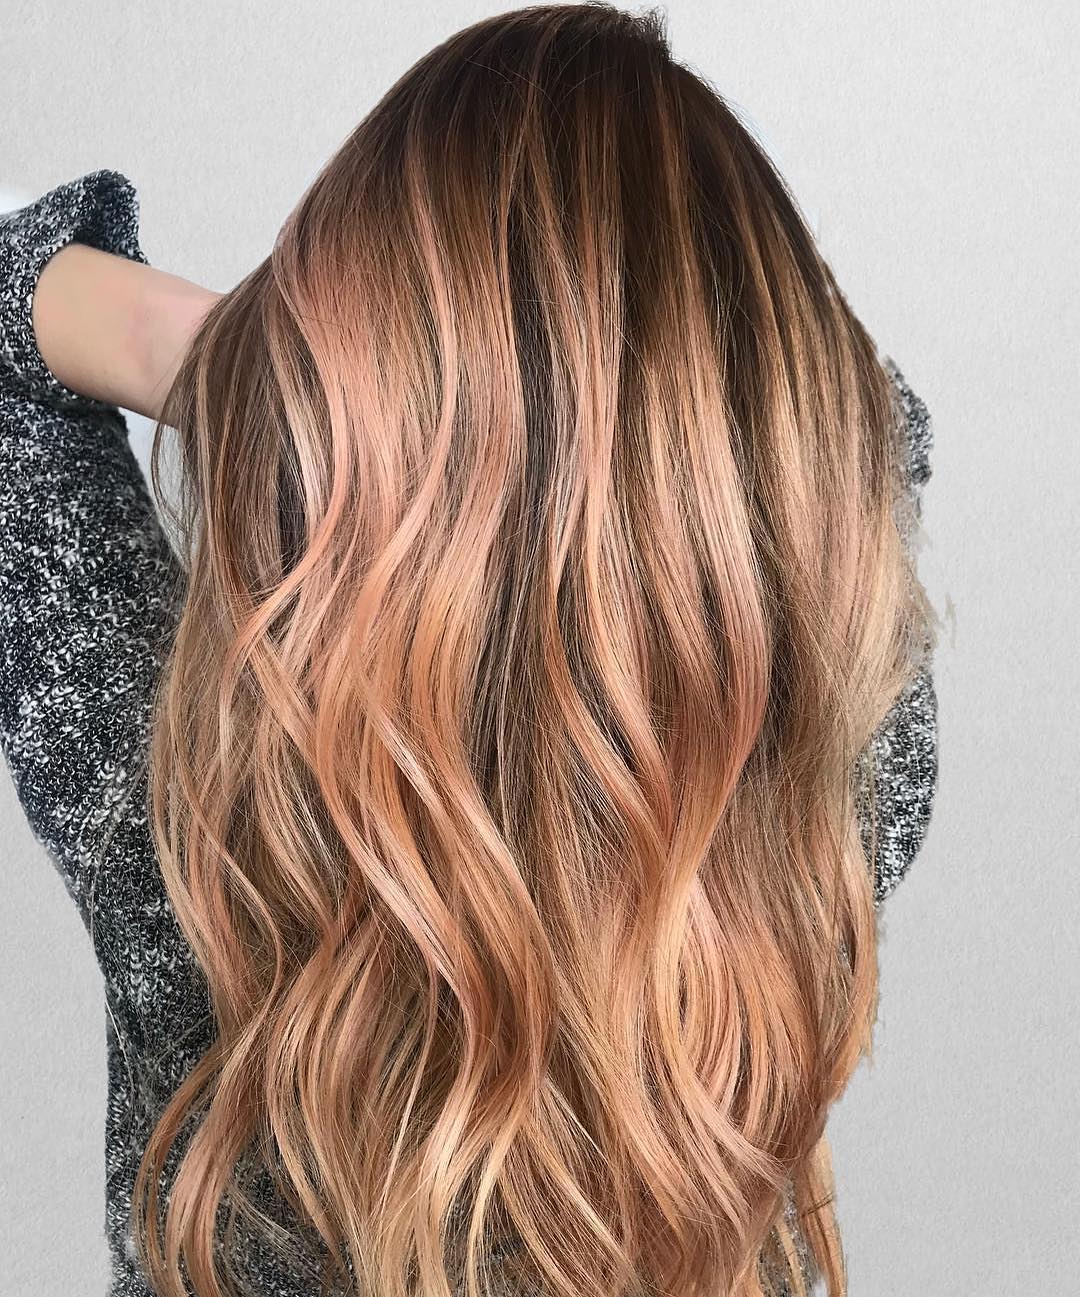 Five New Hair-Color Trends to Try in 2019 - Cole's Salon